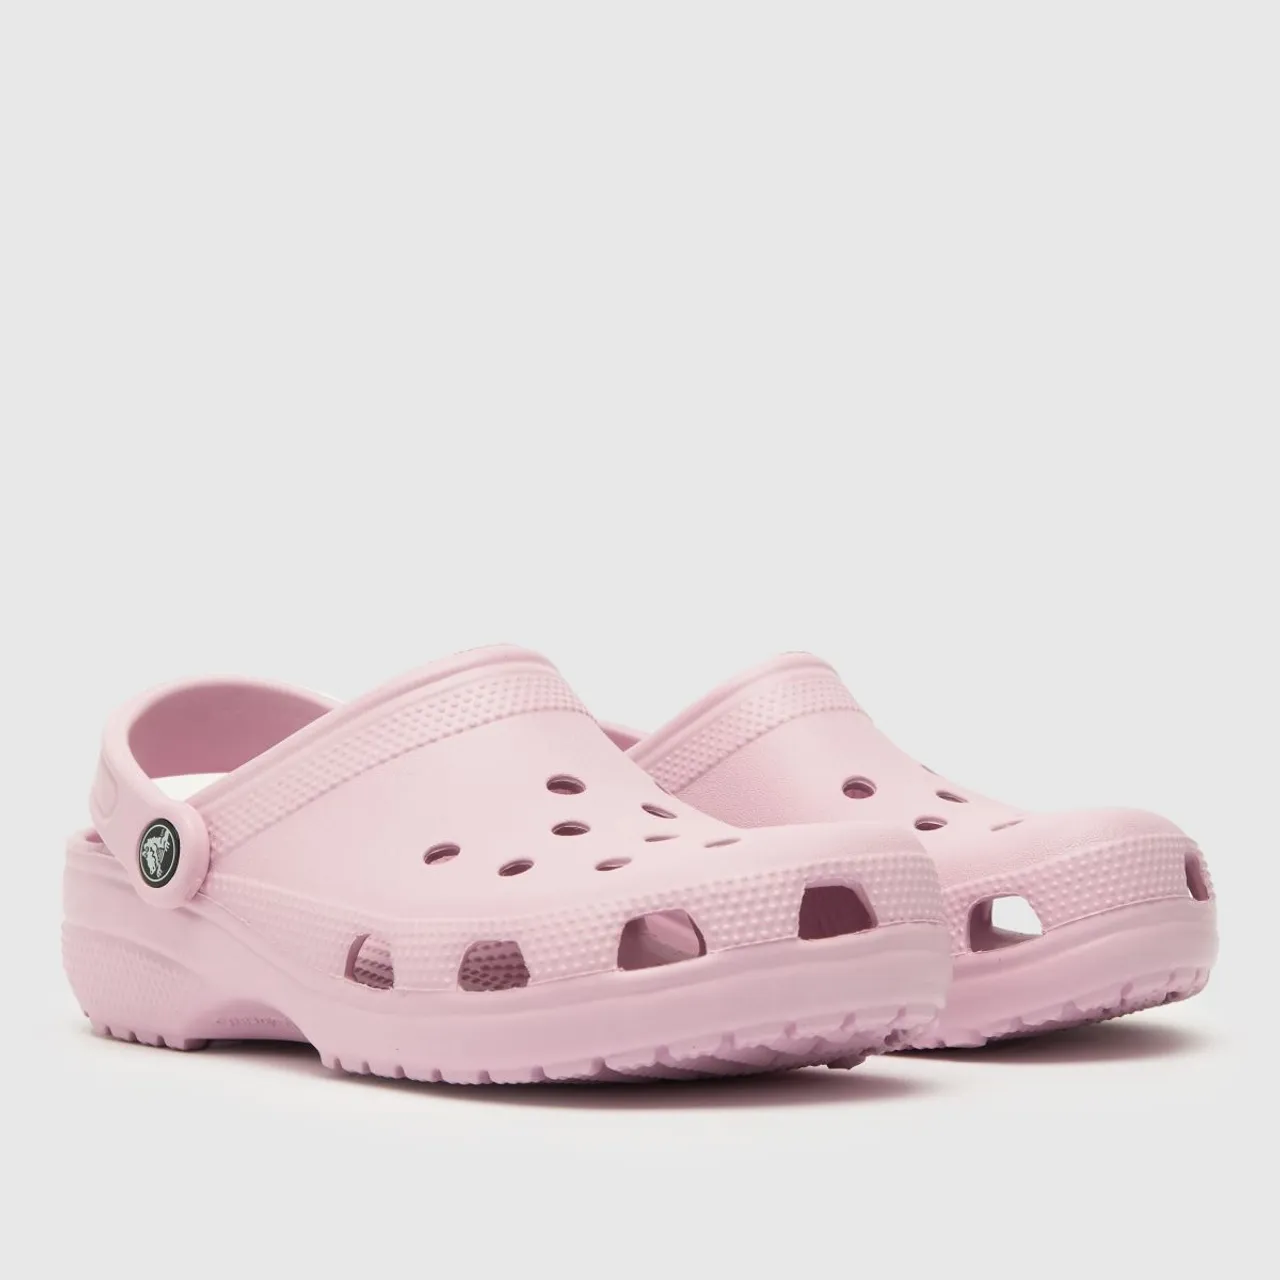 Crocs Pale Pink Classic Clog Girls Youth Sandals